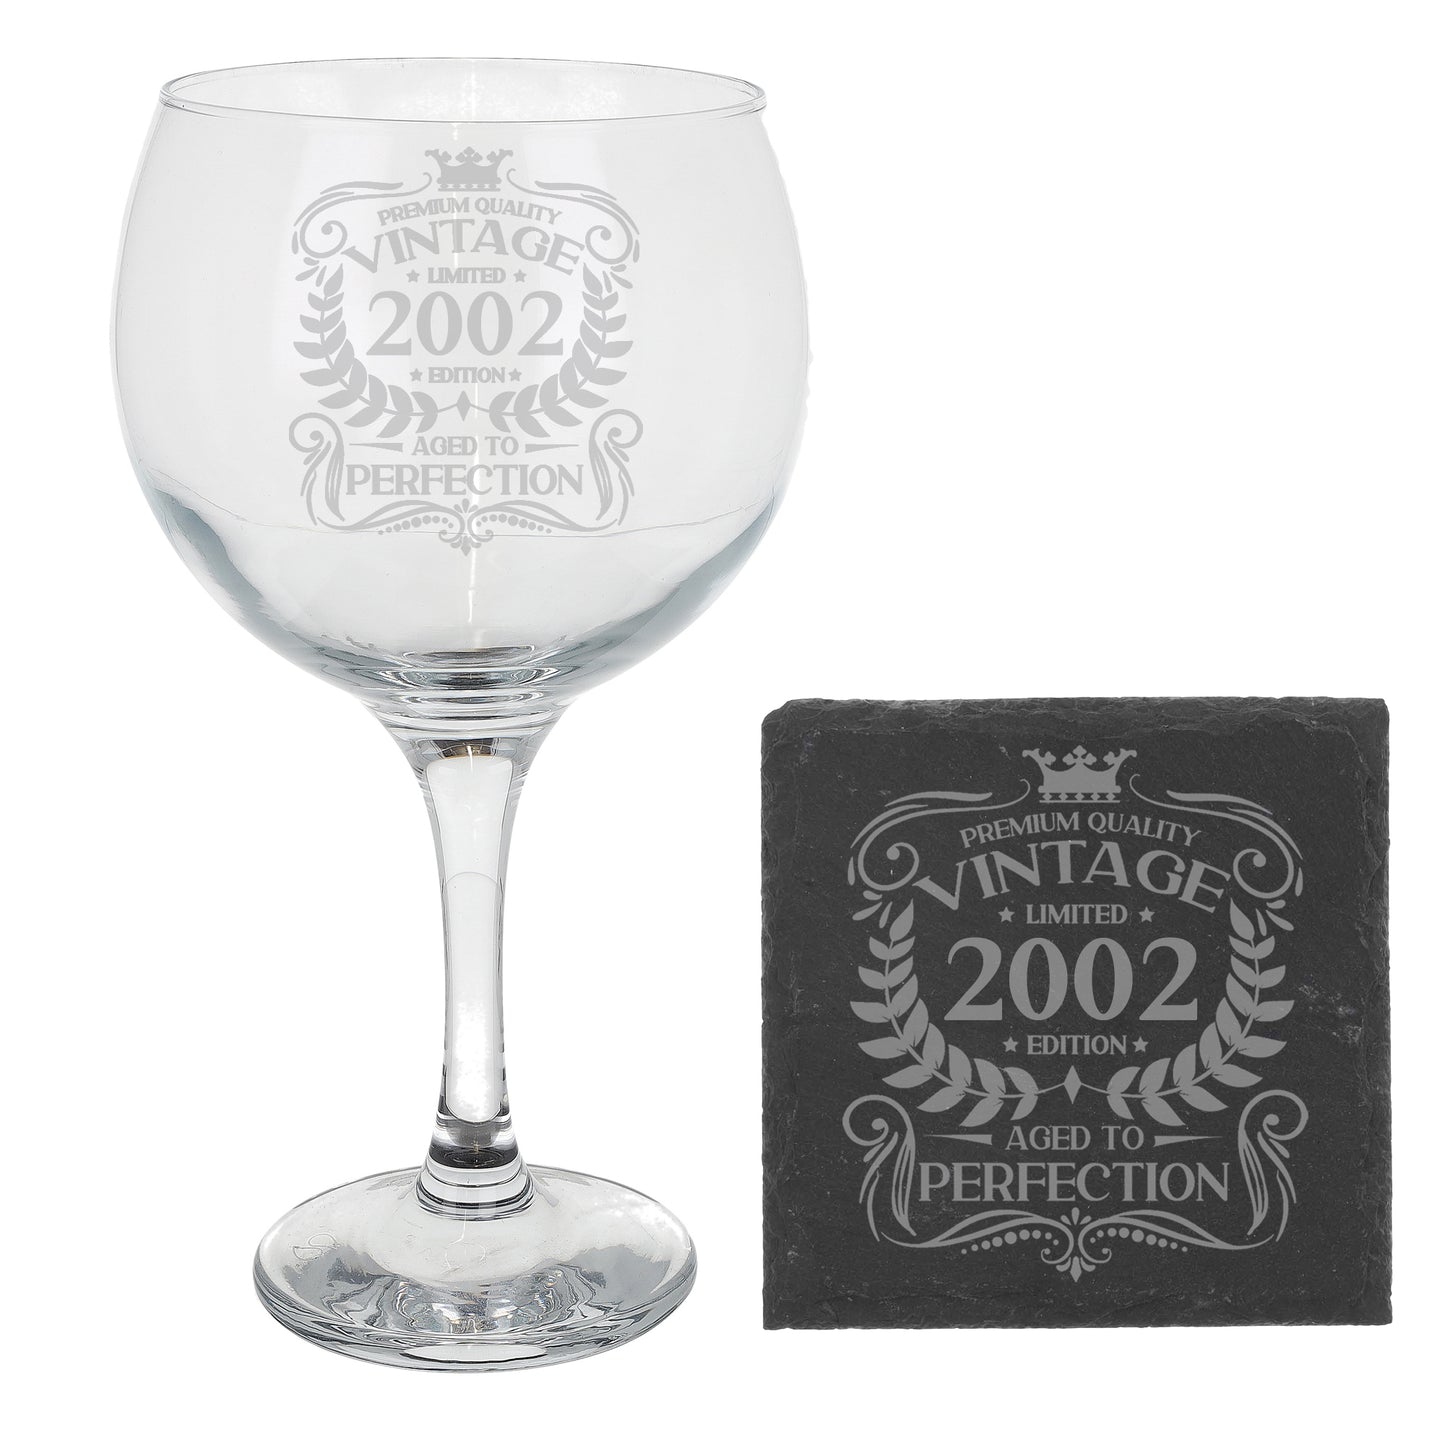 Vintage 2002 21st Birthday Engraved Gin Glass Gift  - Always Looking Good -   